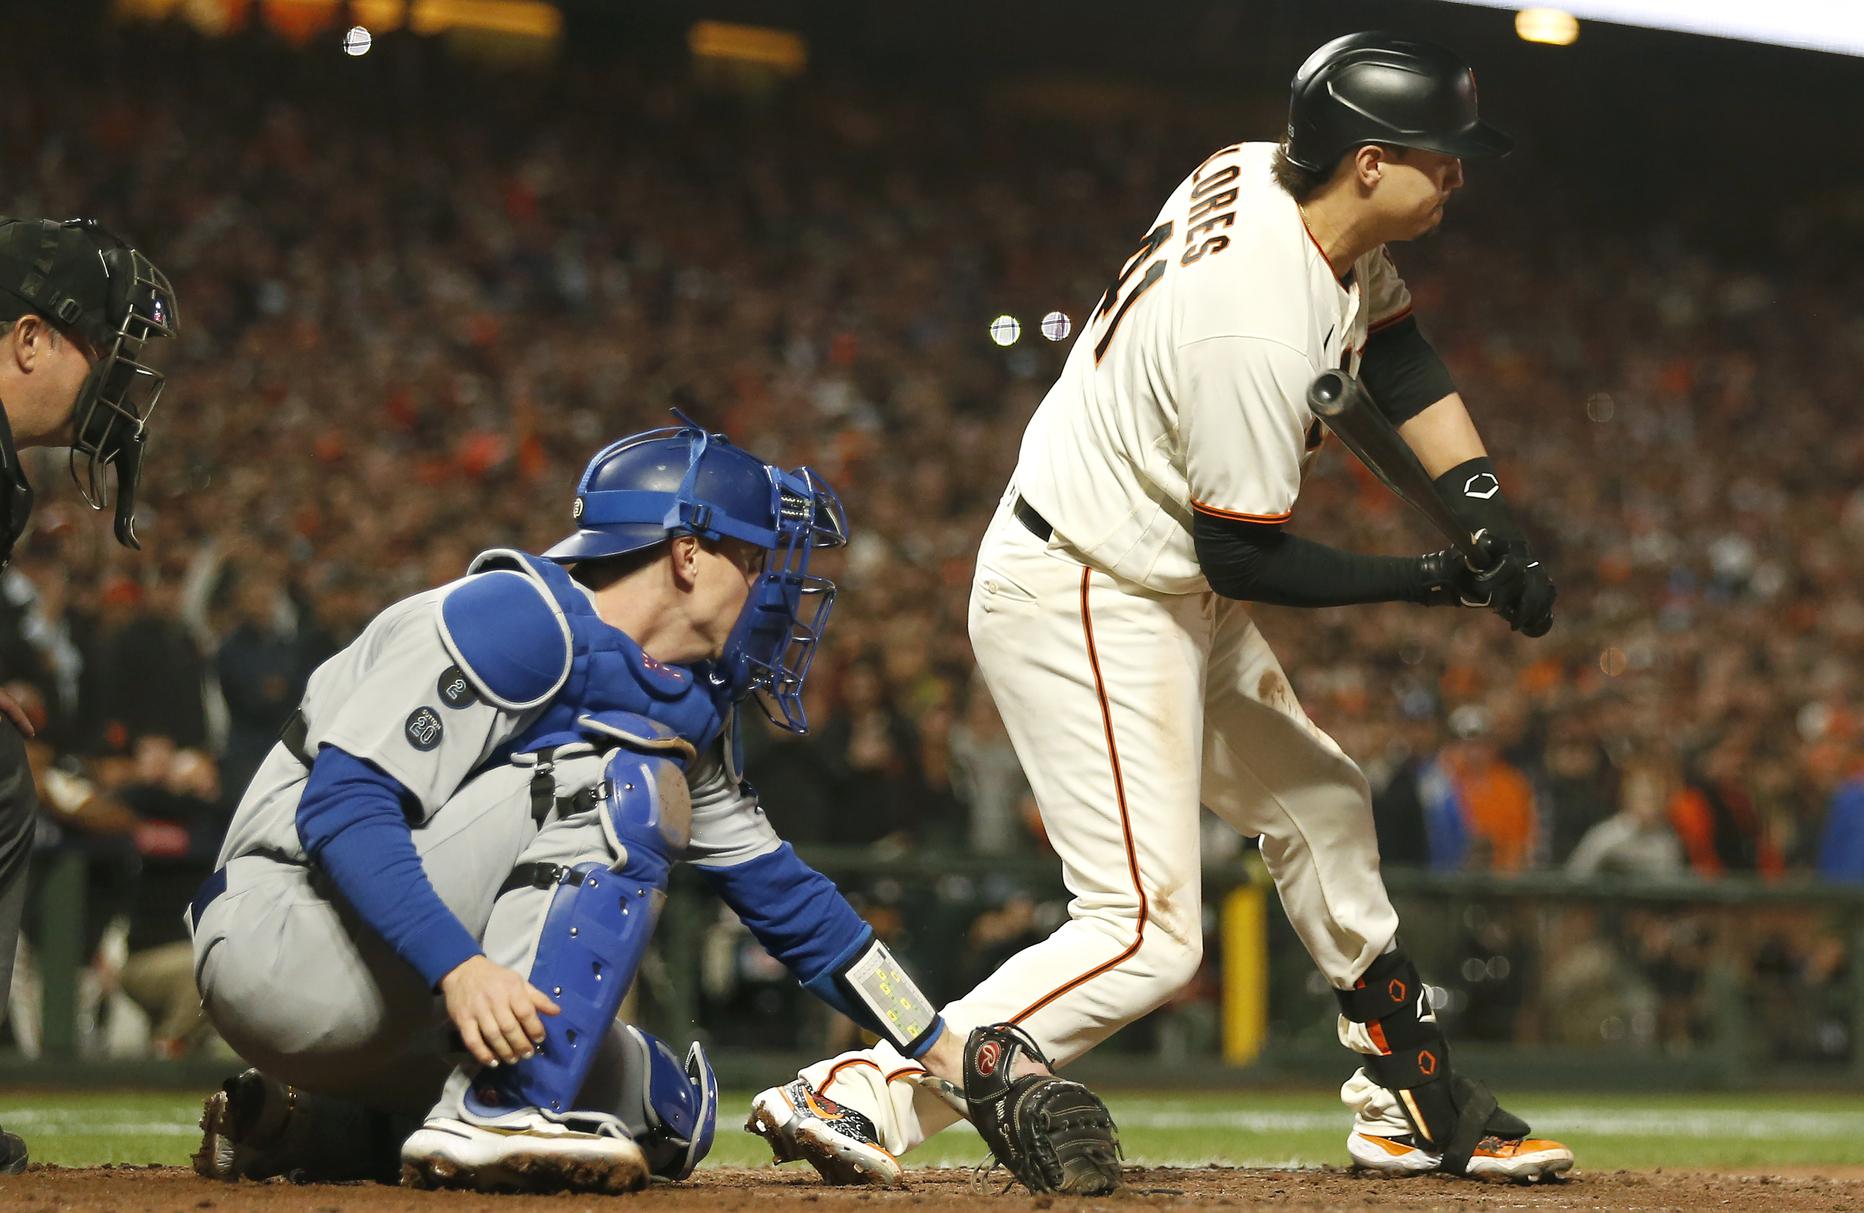 Gabe Morales check-swing call was an inexcusable way to end the Giants season